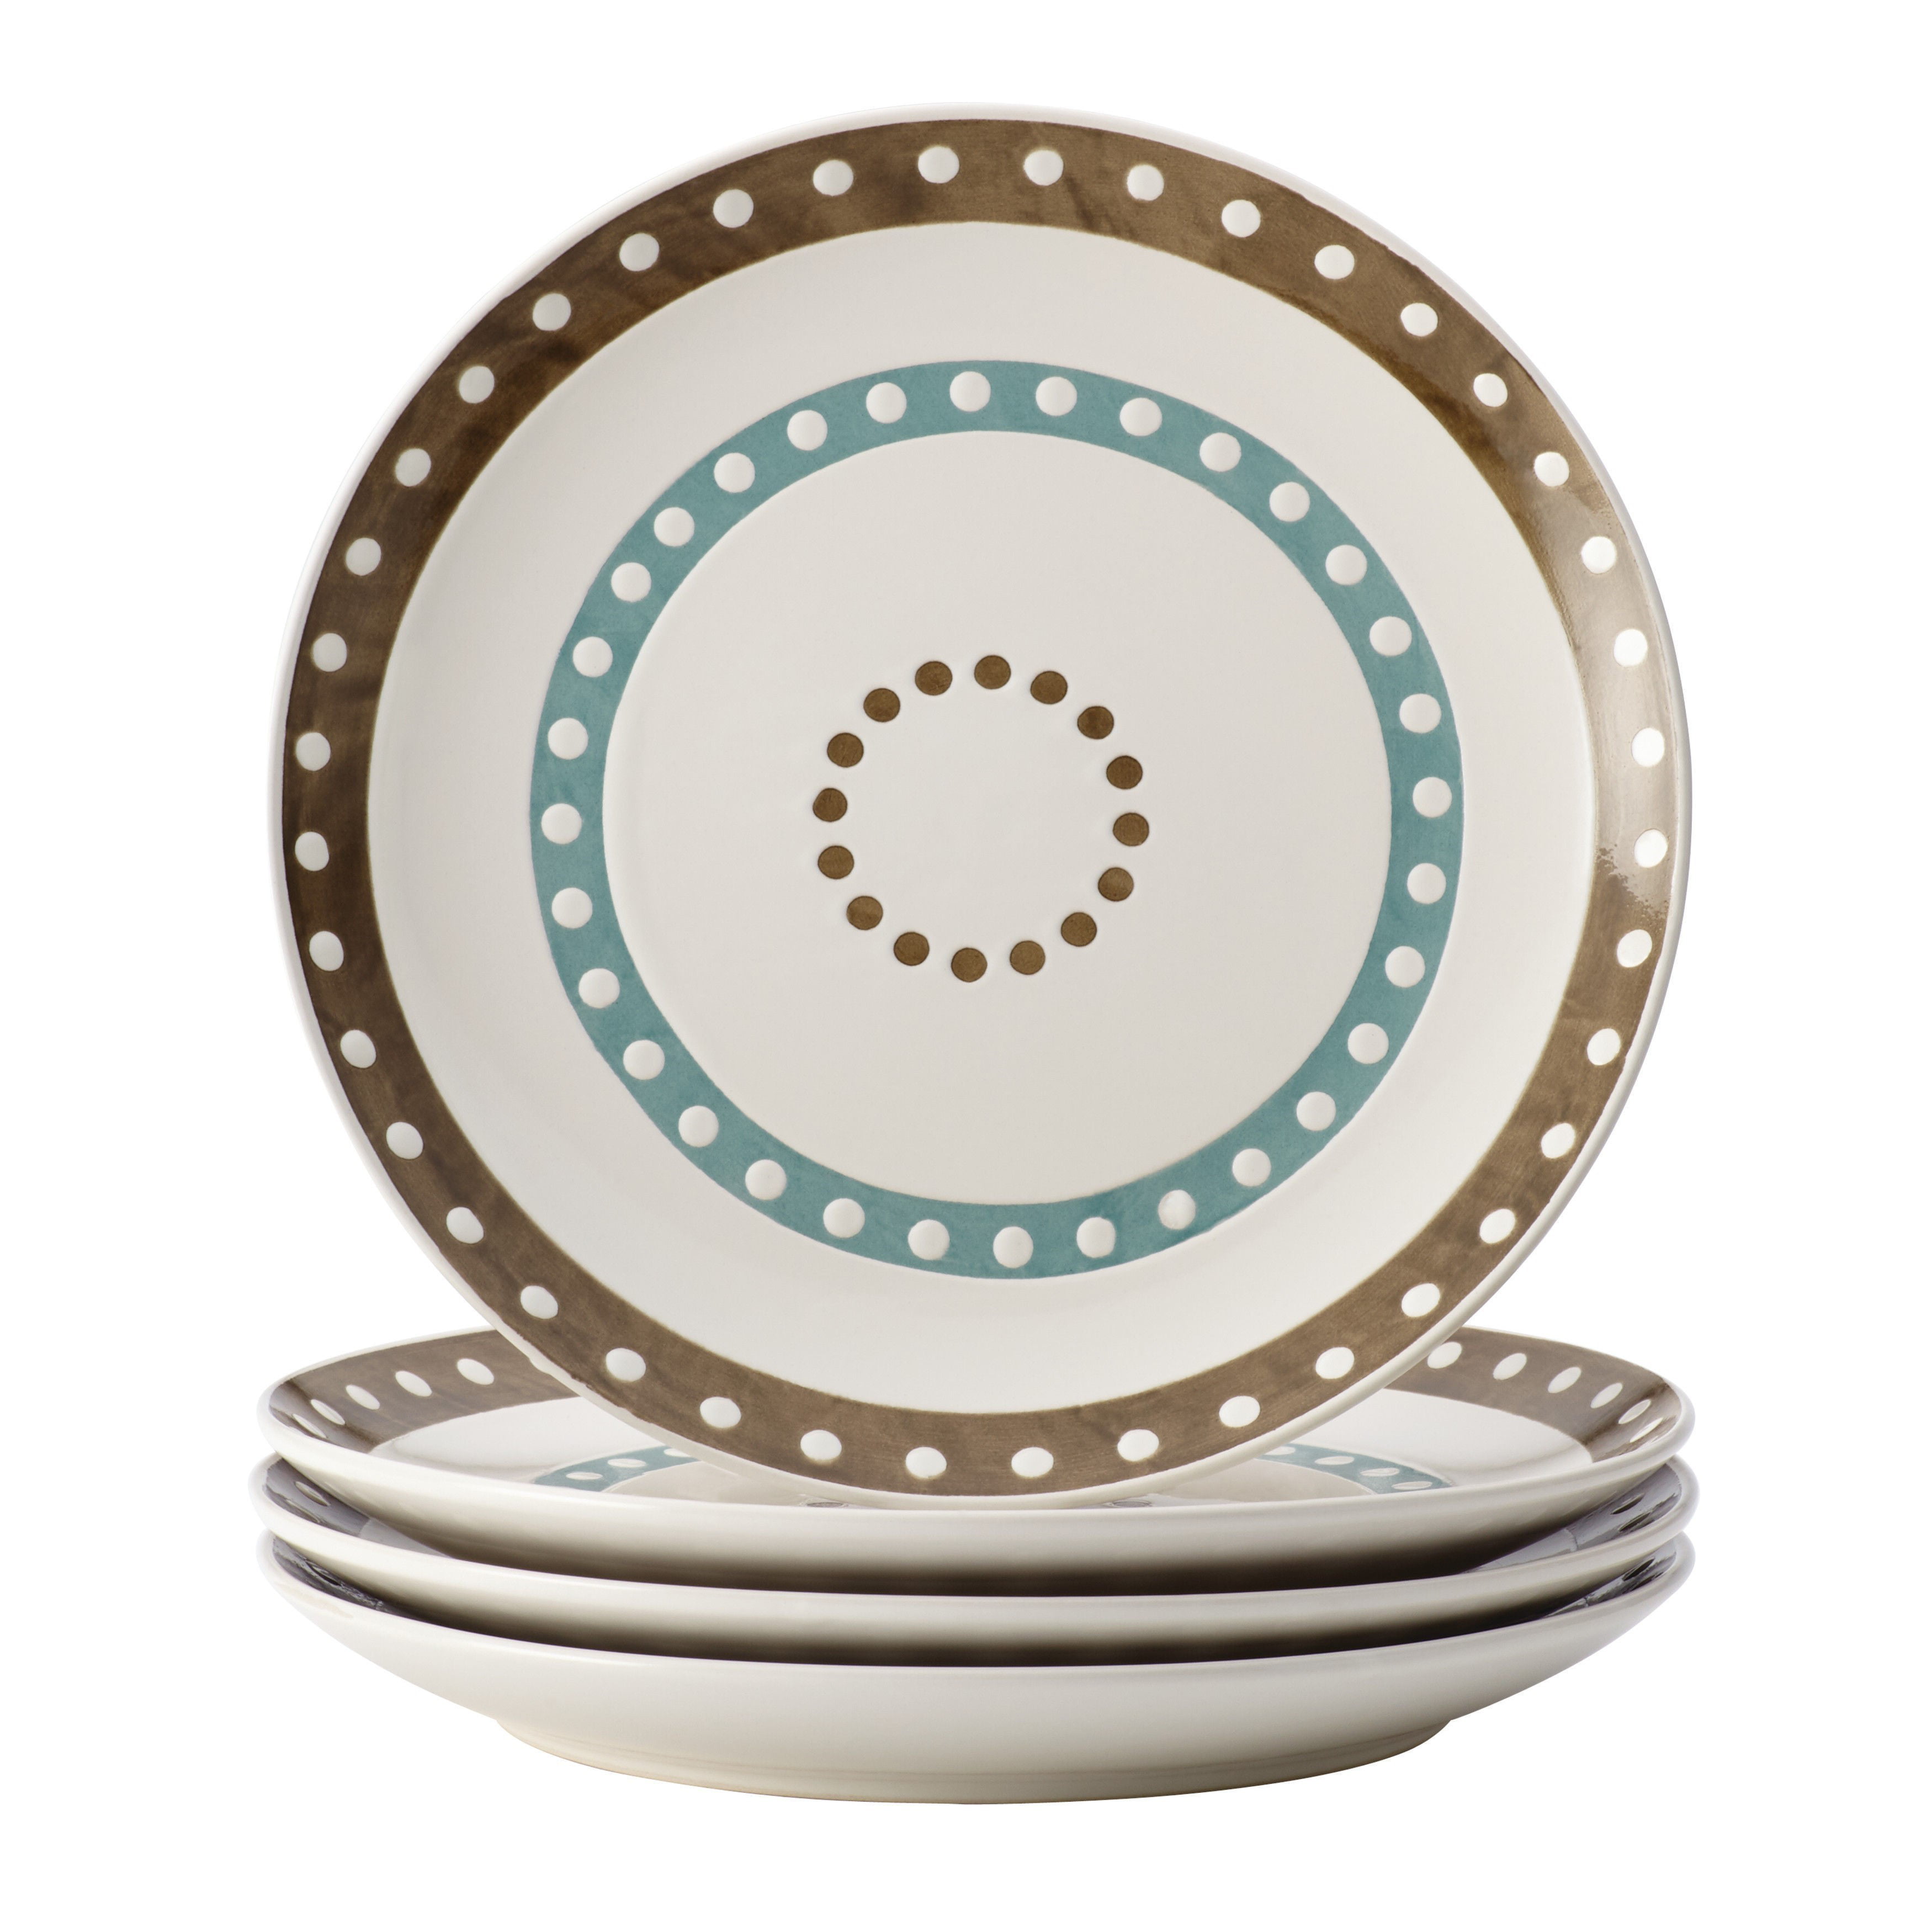 Rachael Ray Cucina Circles and Dots Ceramic Dinnerware Plate Agave Blue Set of 4